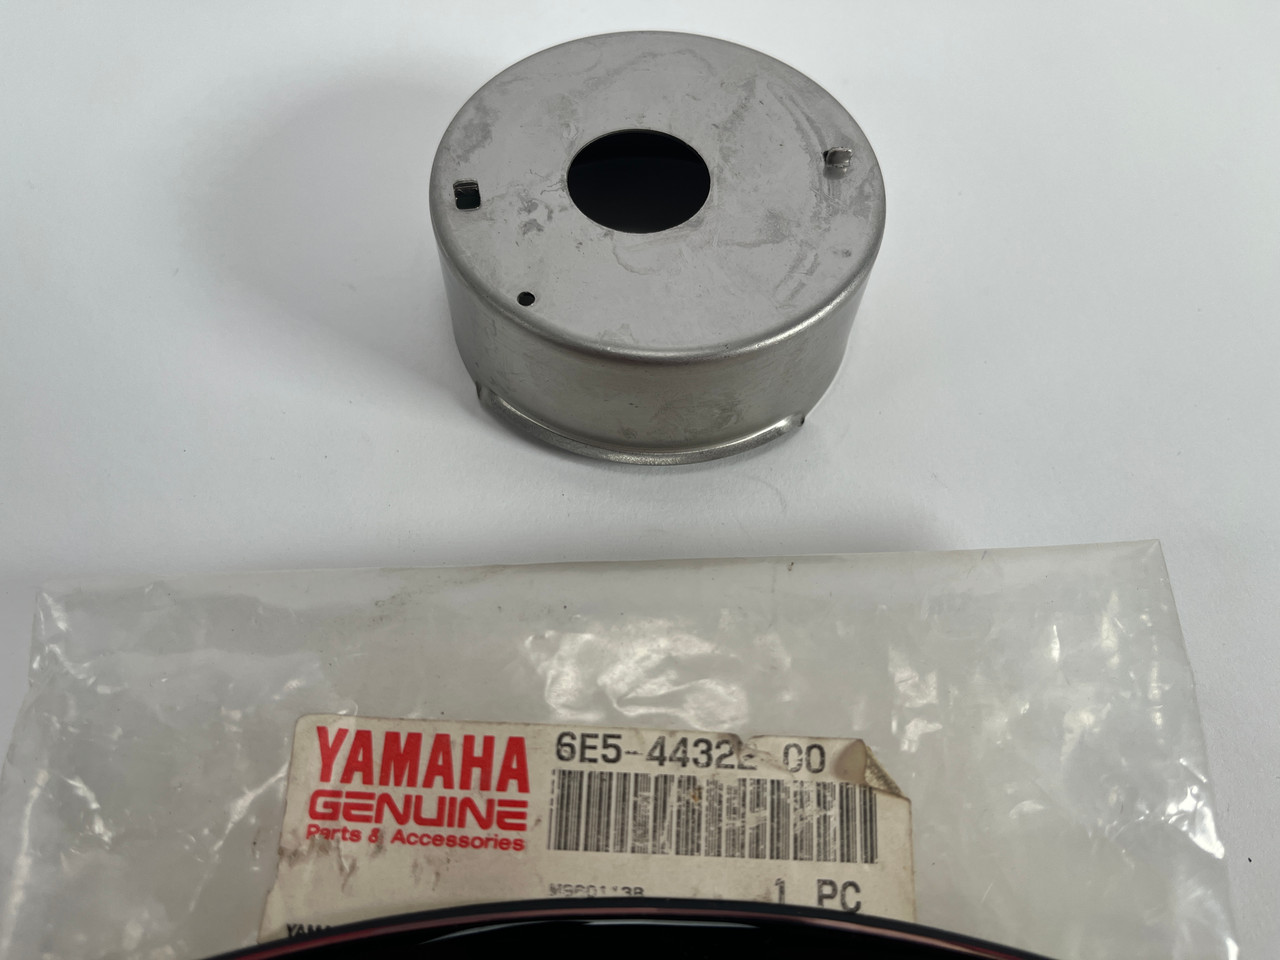 $52.99 GENUINE YAMAHA INSERT CARTRIDGE no tax* 6E5-44322-00-00 *In Stock And Ready To Ship!